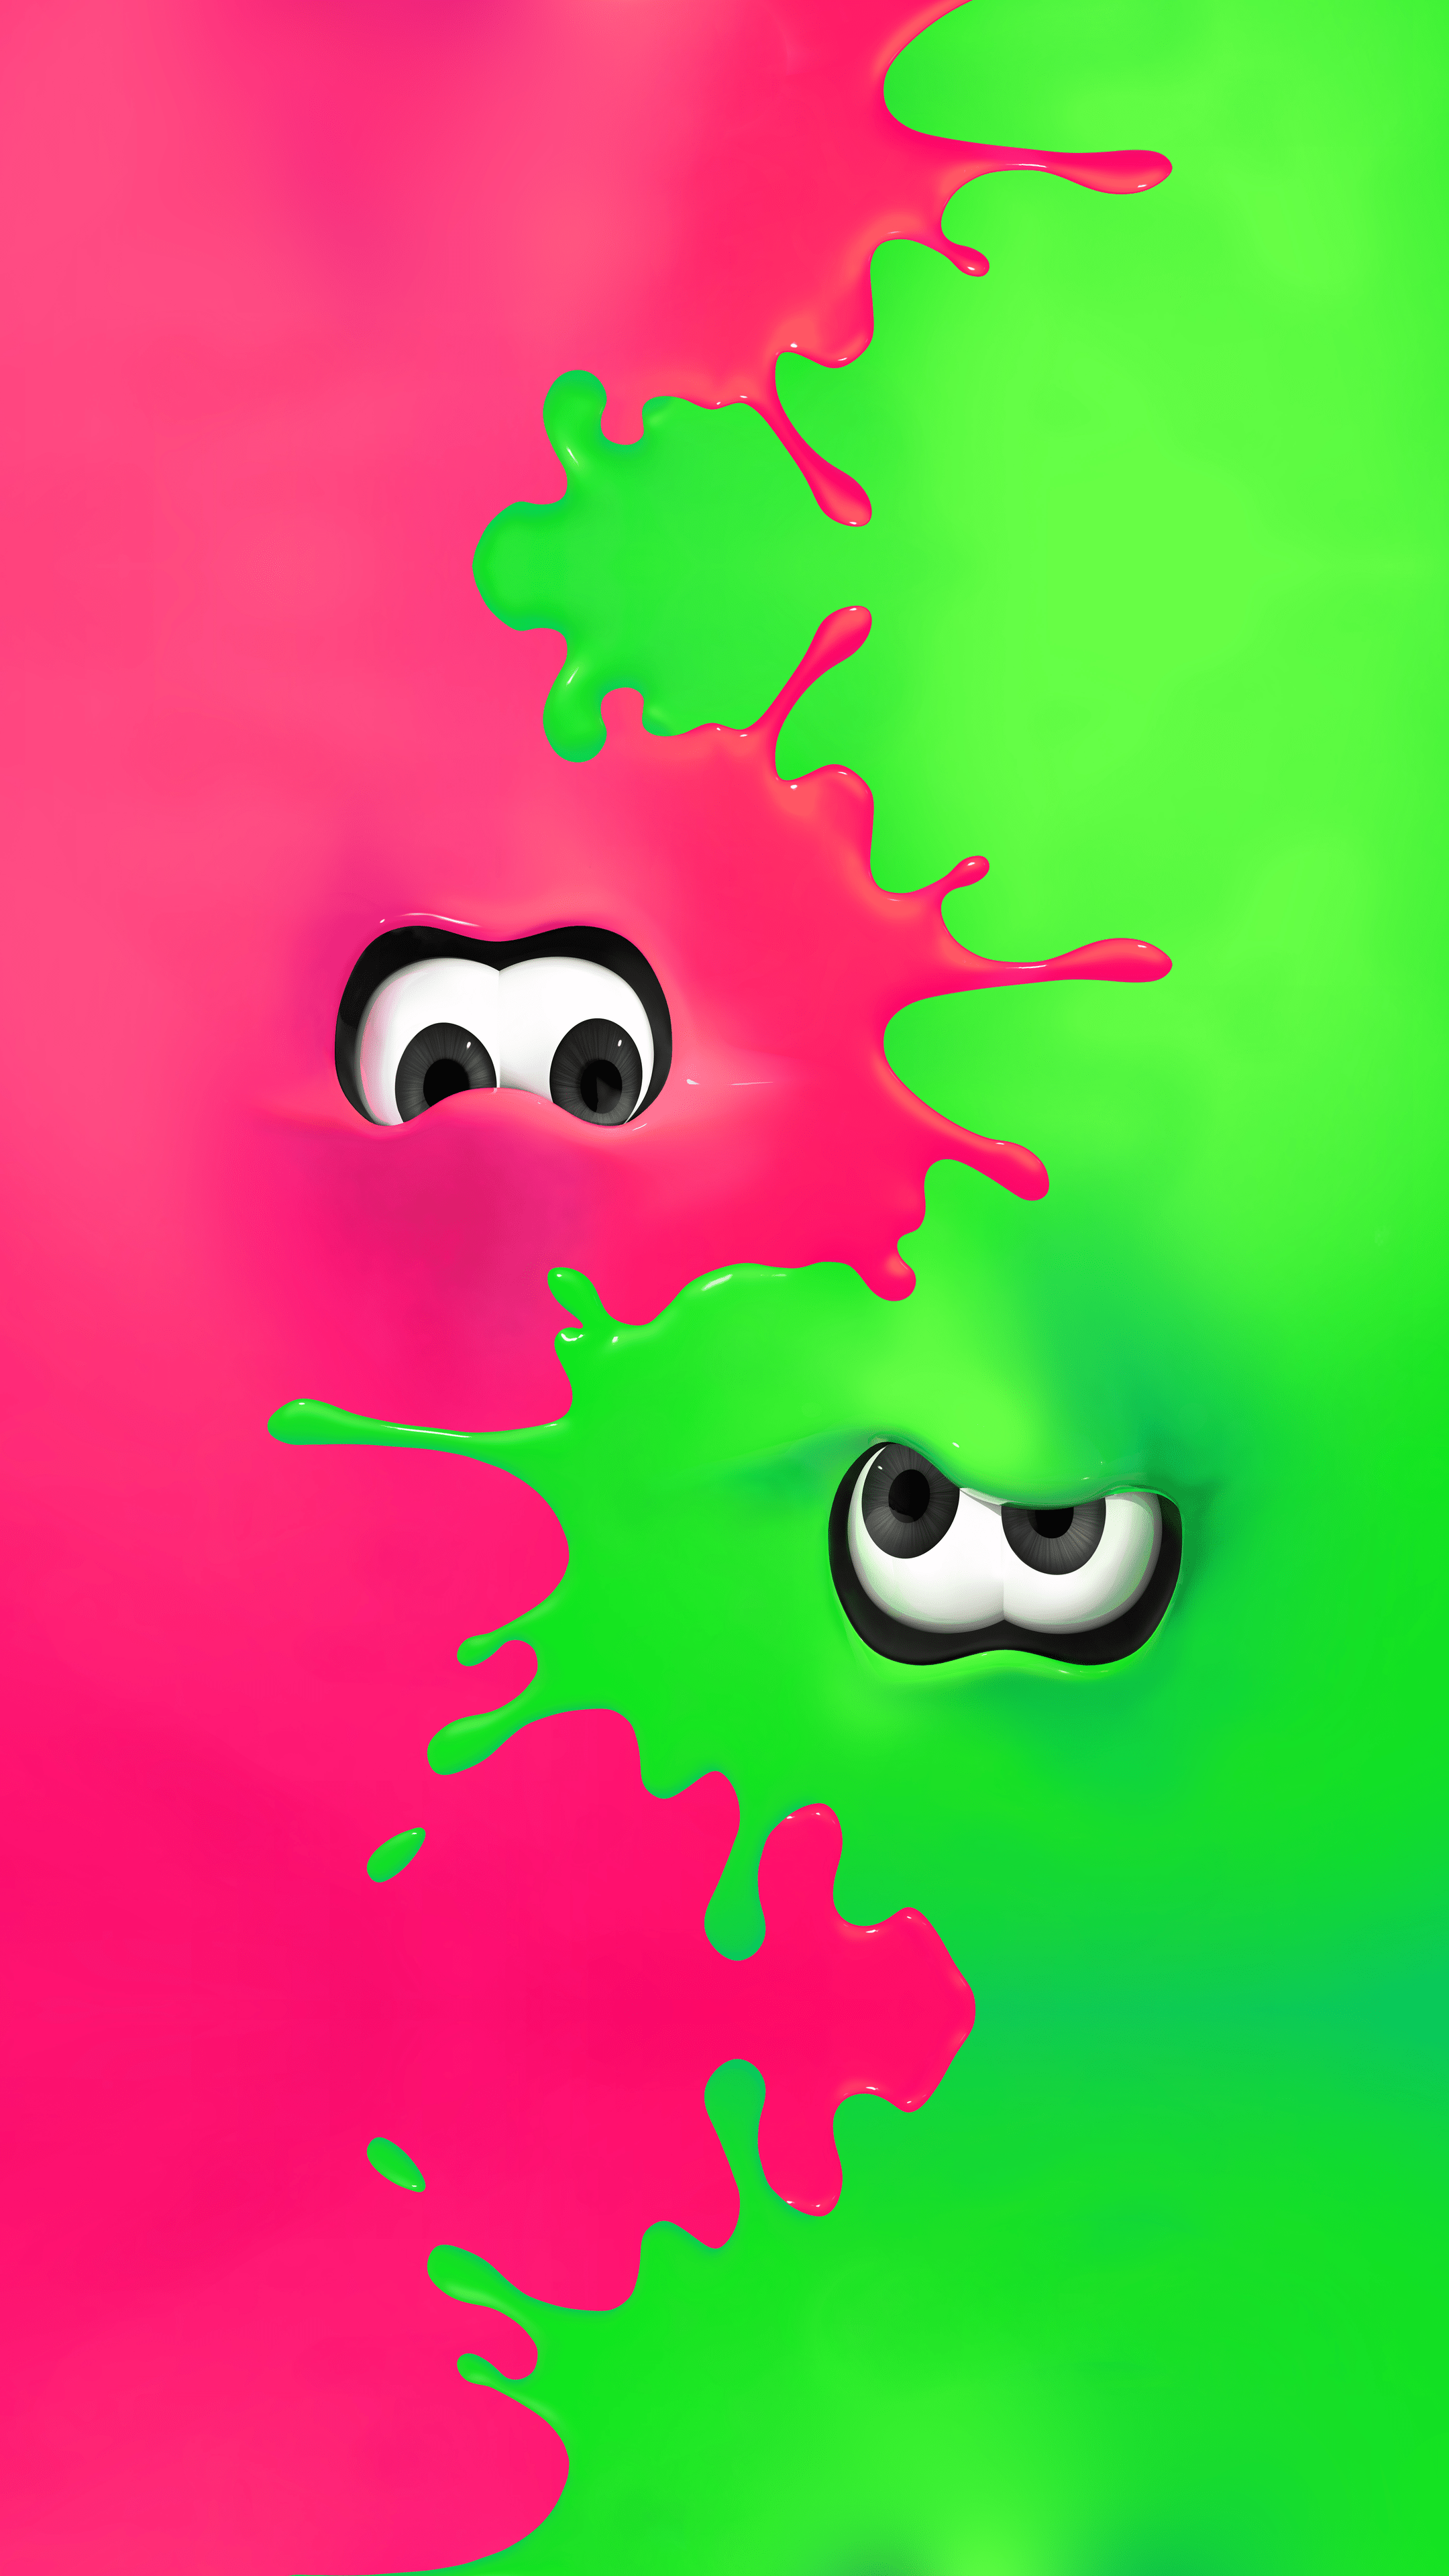 A splat of pink and green paint with eyes looking out. - Nintendo